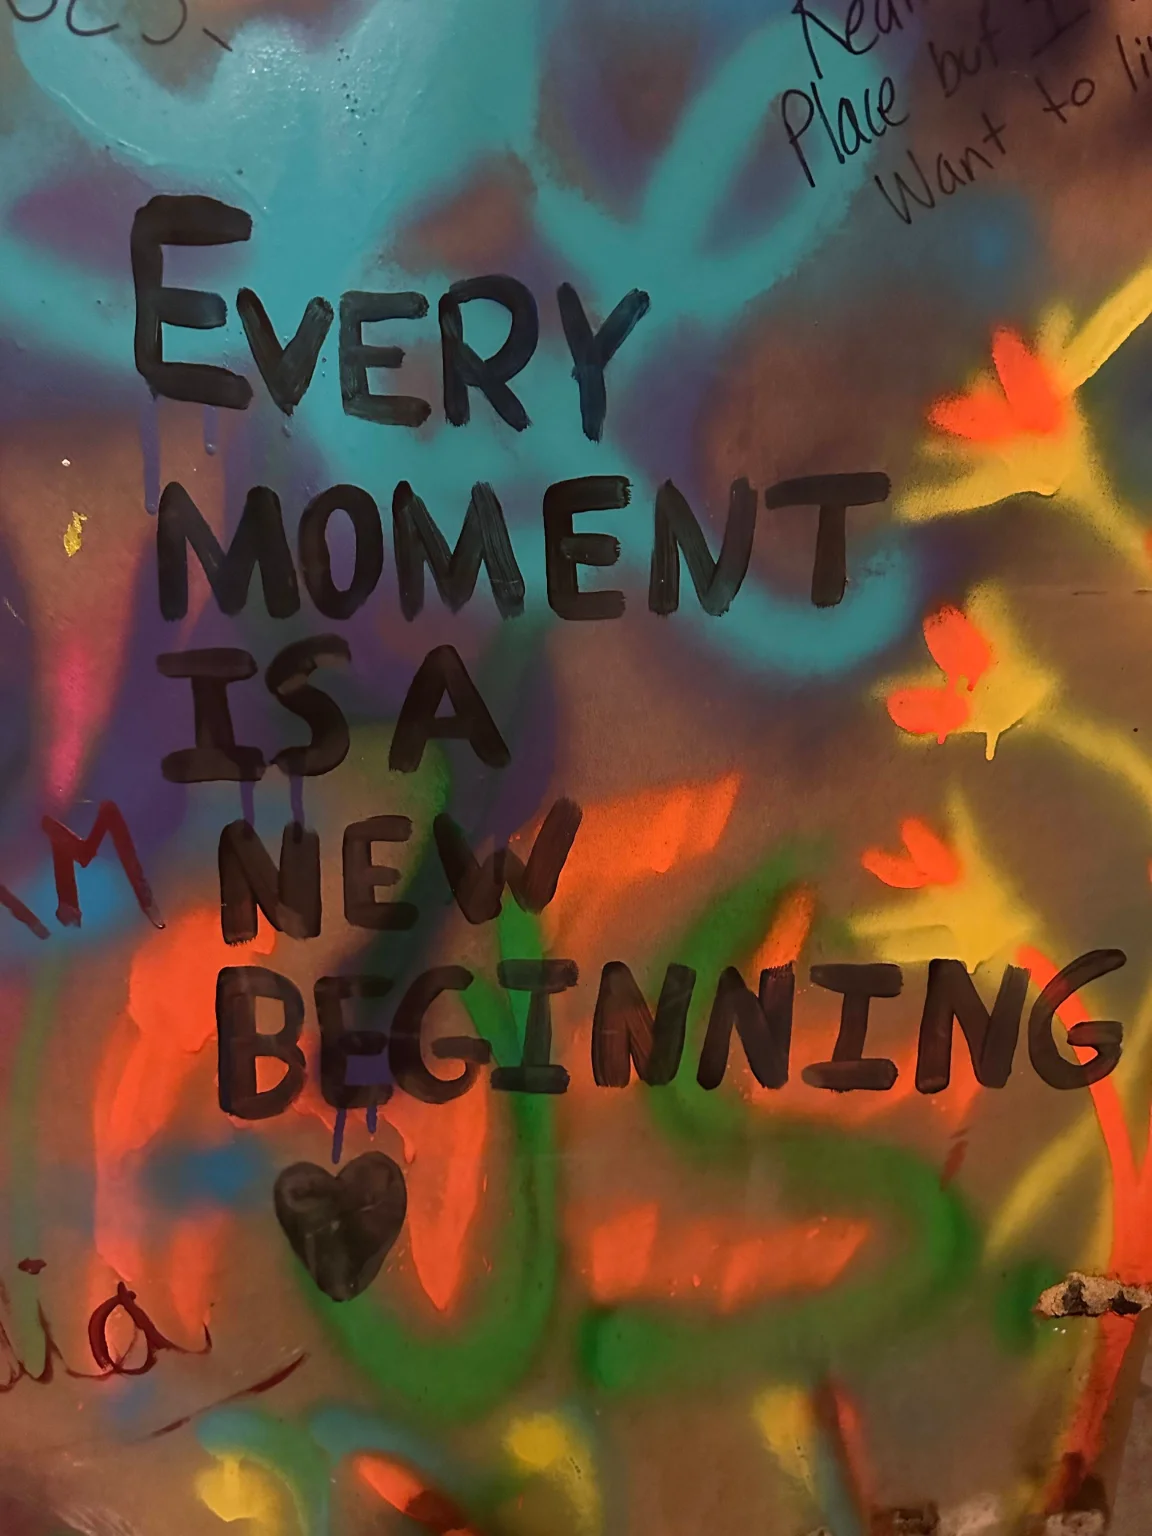 Artwork reading "Every moment is a new beginning"